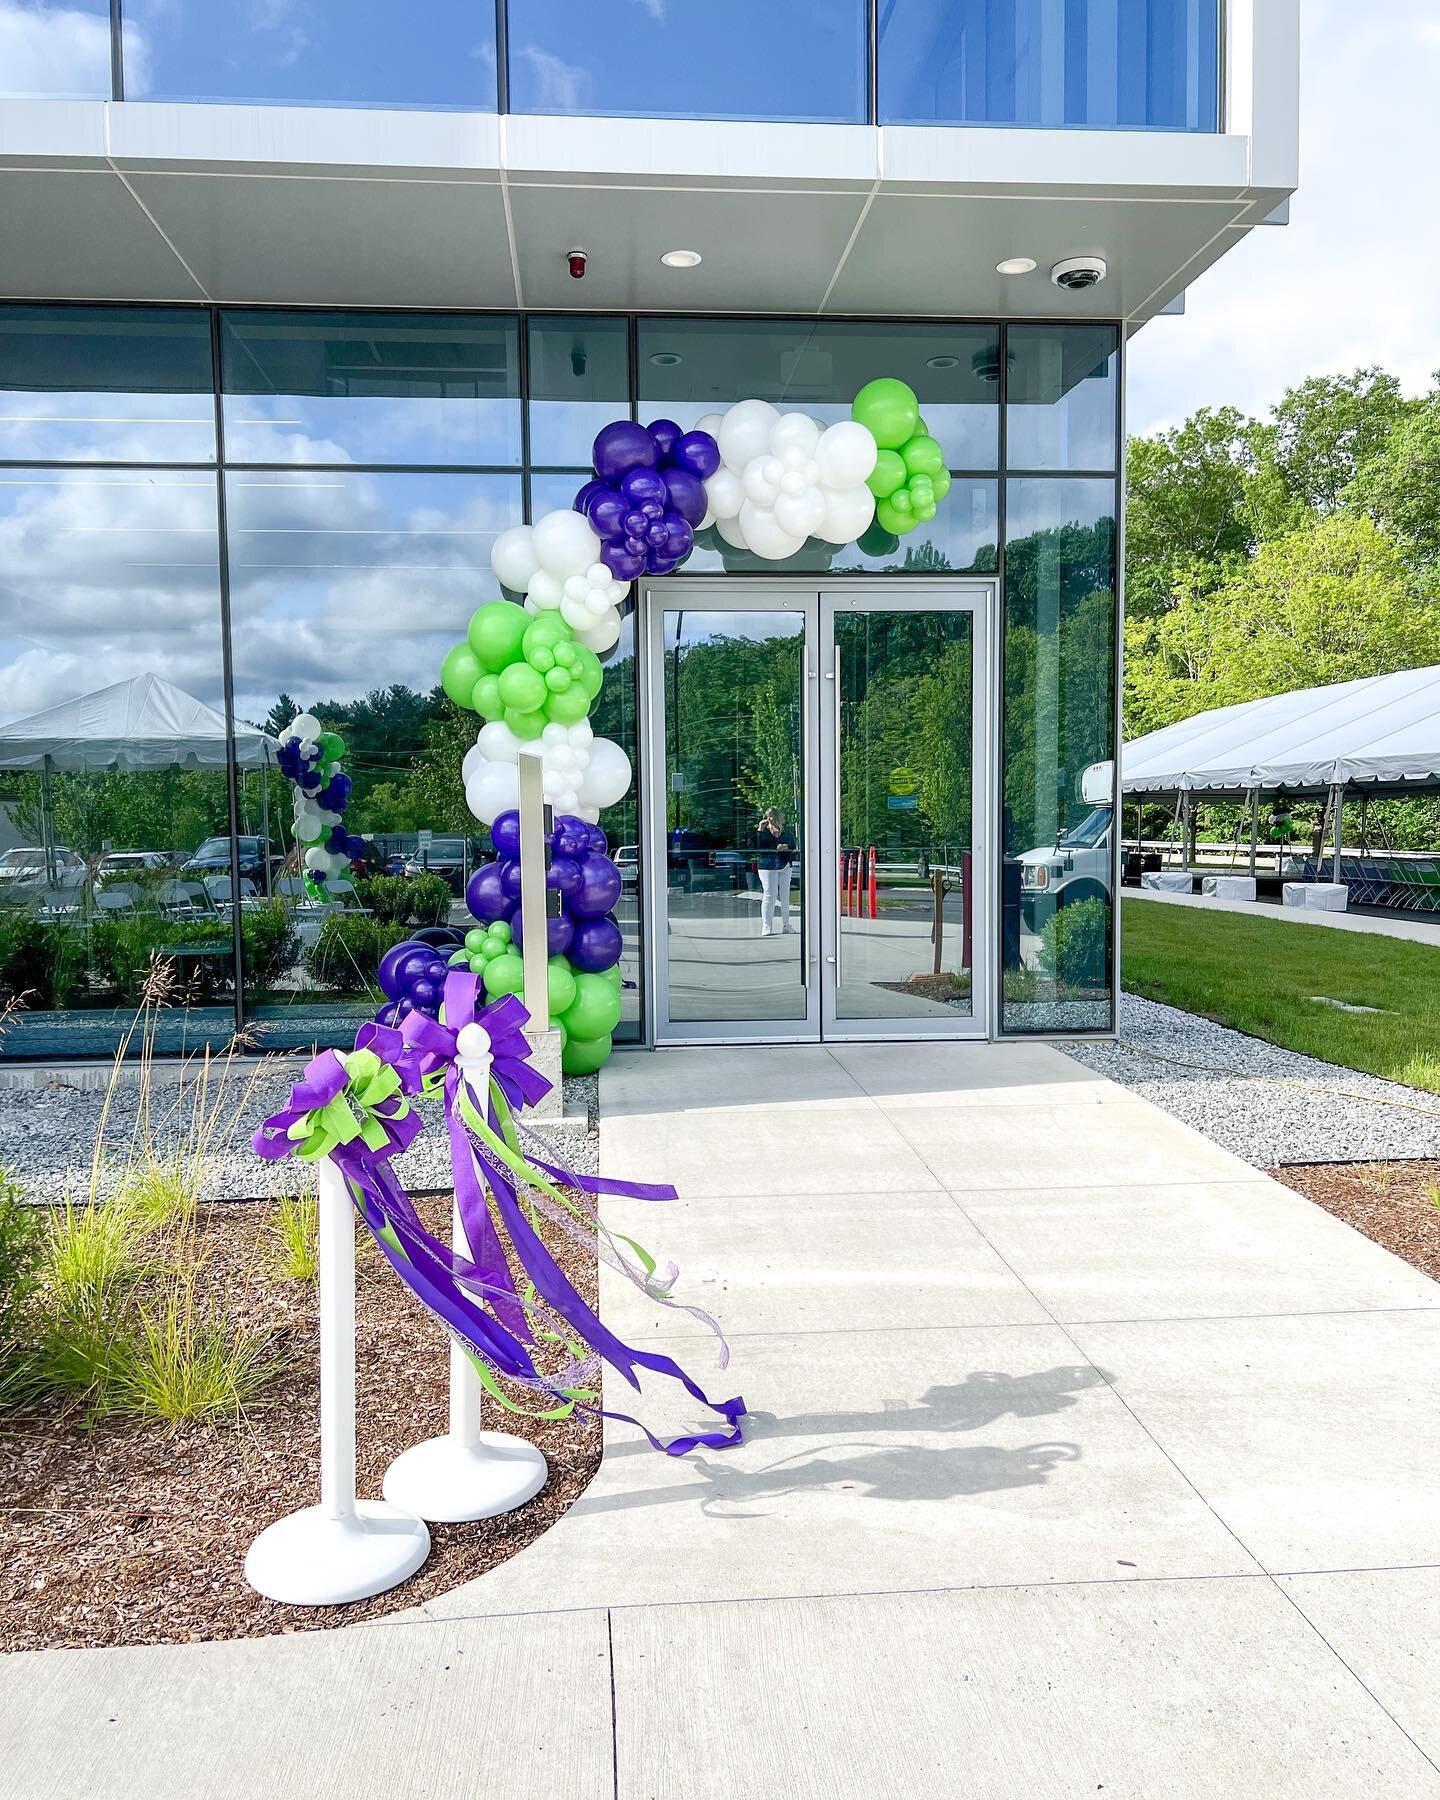 Beep! Beep! If you don&rsquo;t want polished, fun, and over the top balloons for your party or corporate event- we aren&rsquo;t the balloon company for you 😜